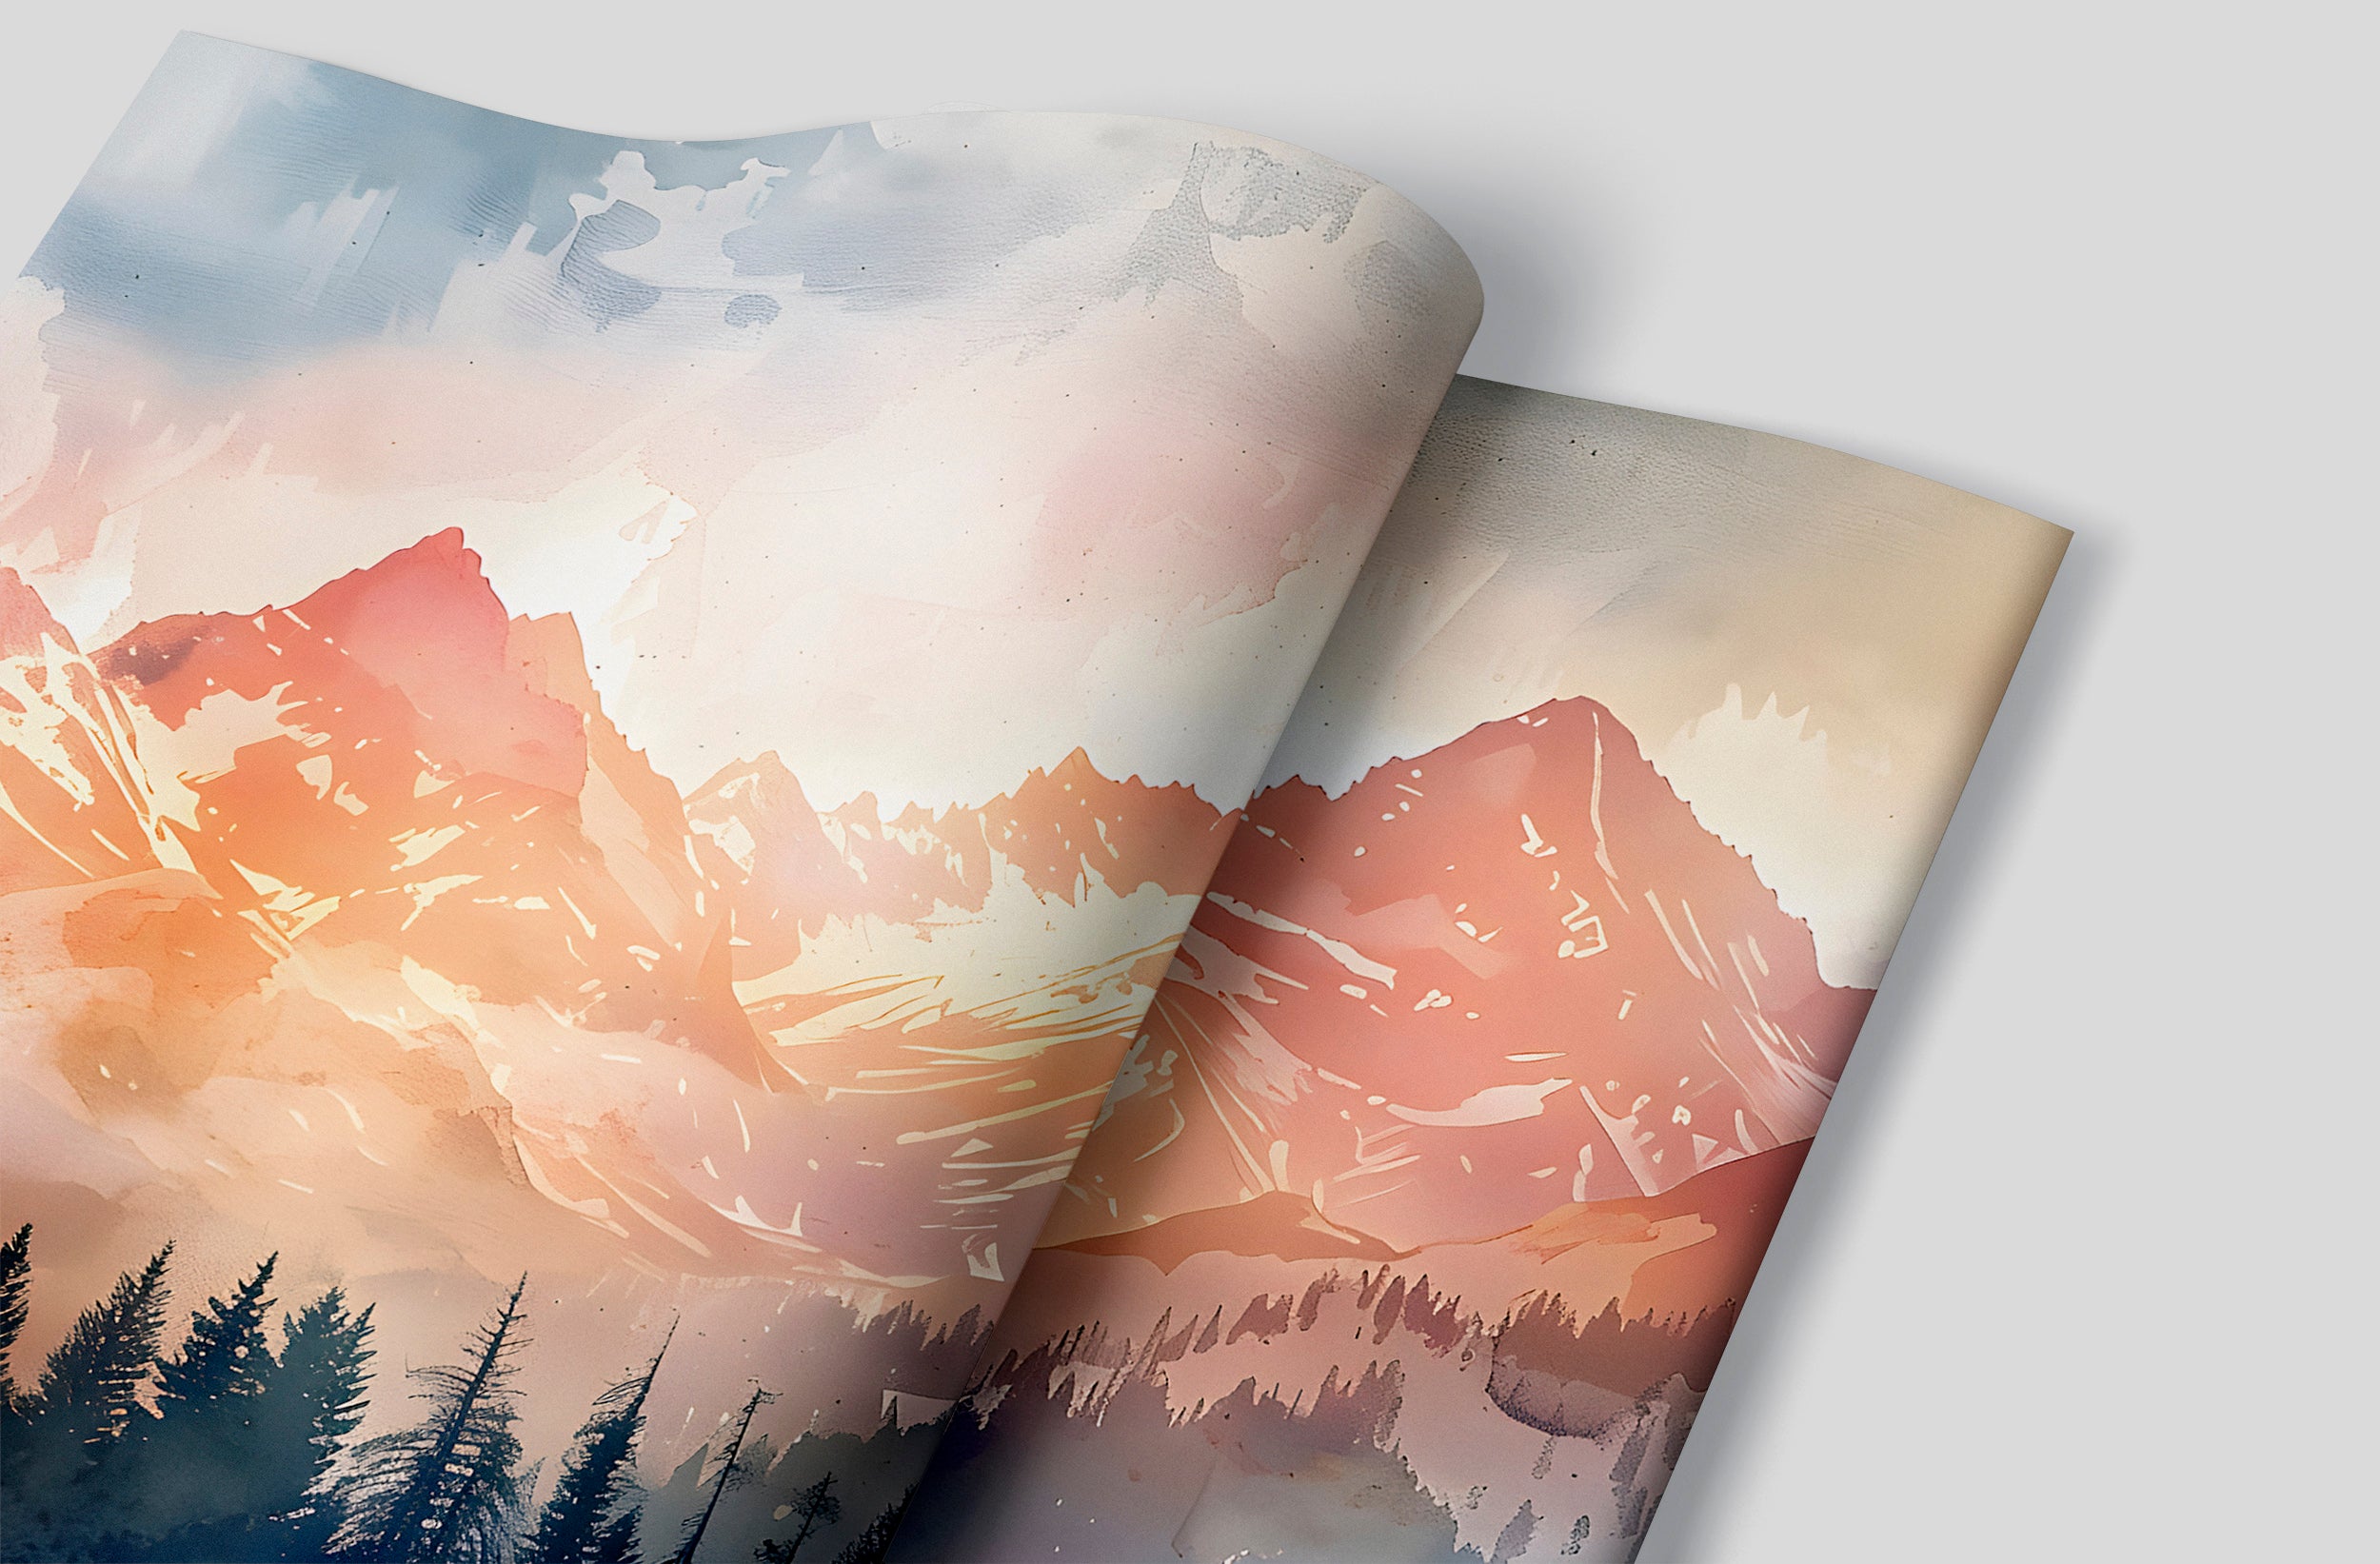 Watercolor Mountain Sunset Wallpaper, Colorful Mountains and Forest Mural, Peel and Stick Orange Landscape Nursery Decal, PVC-free